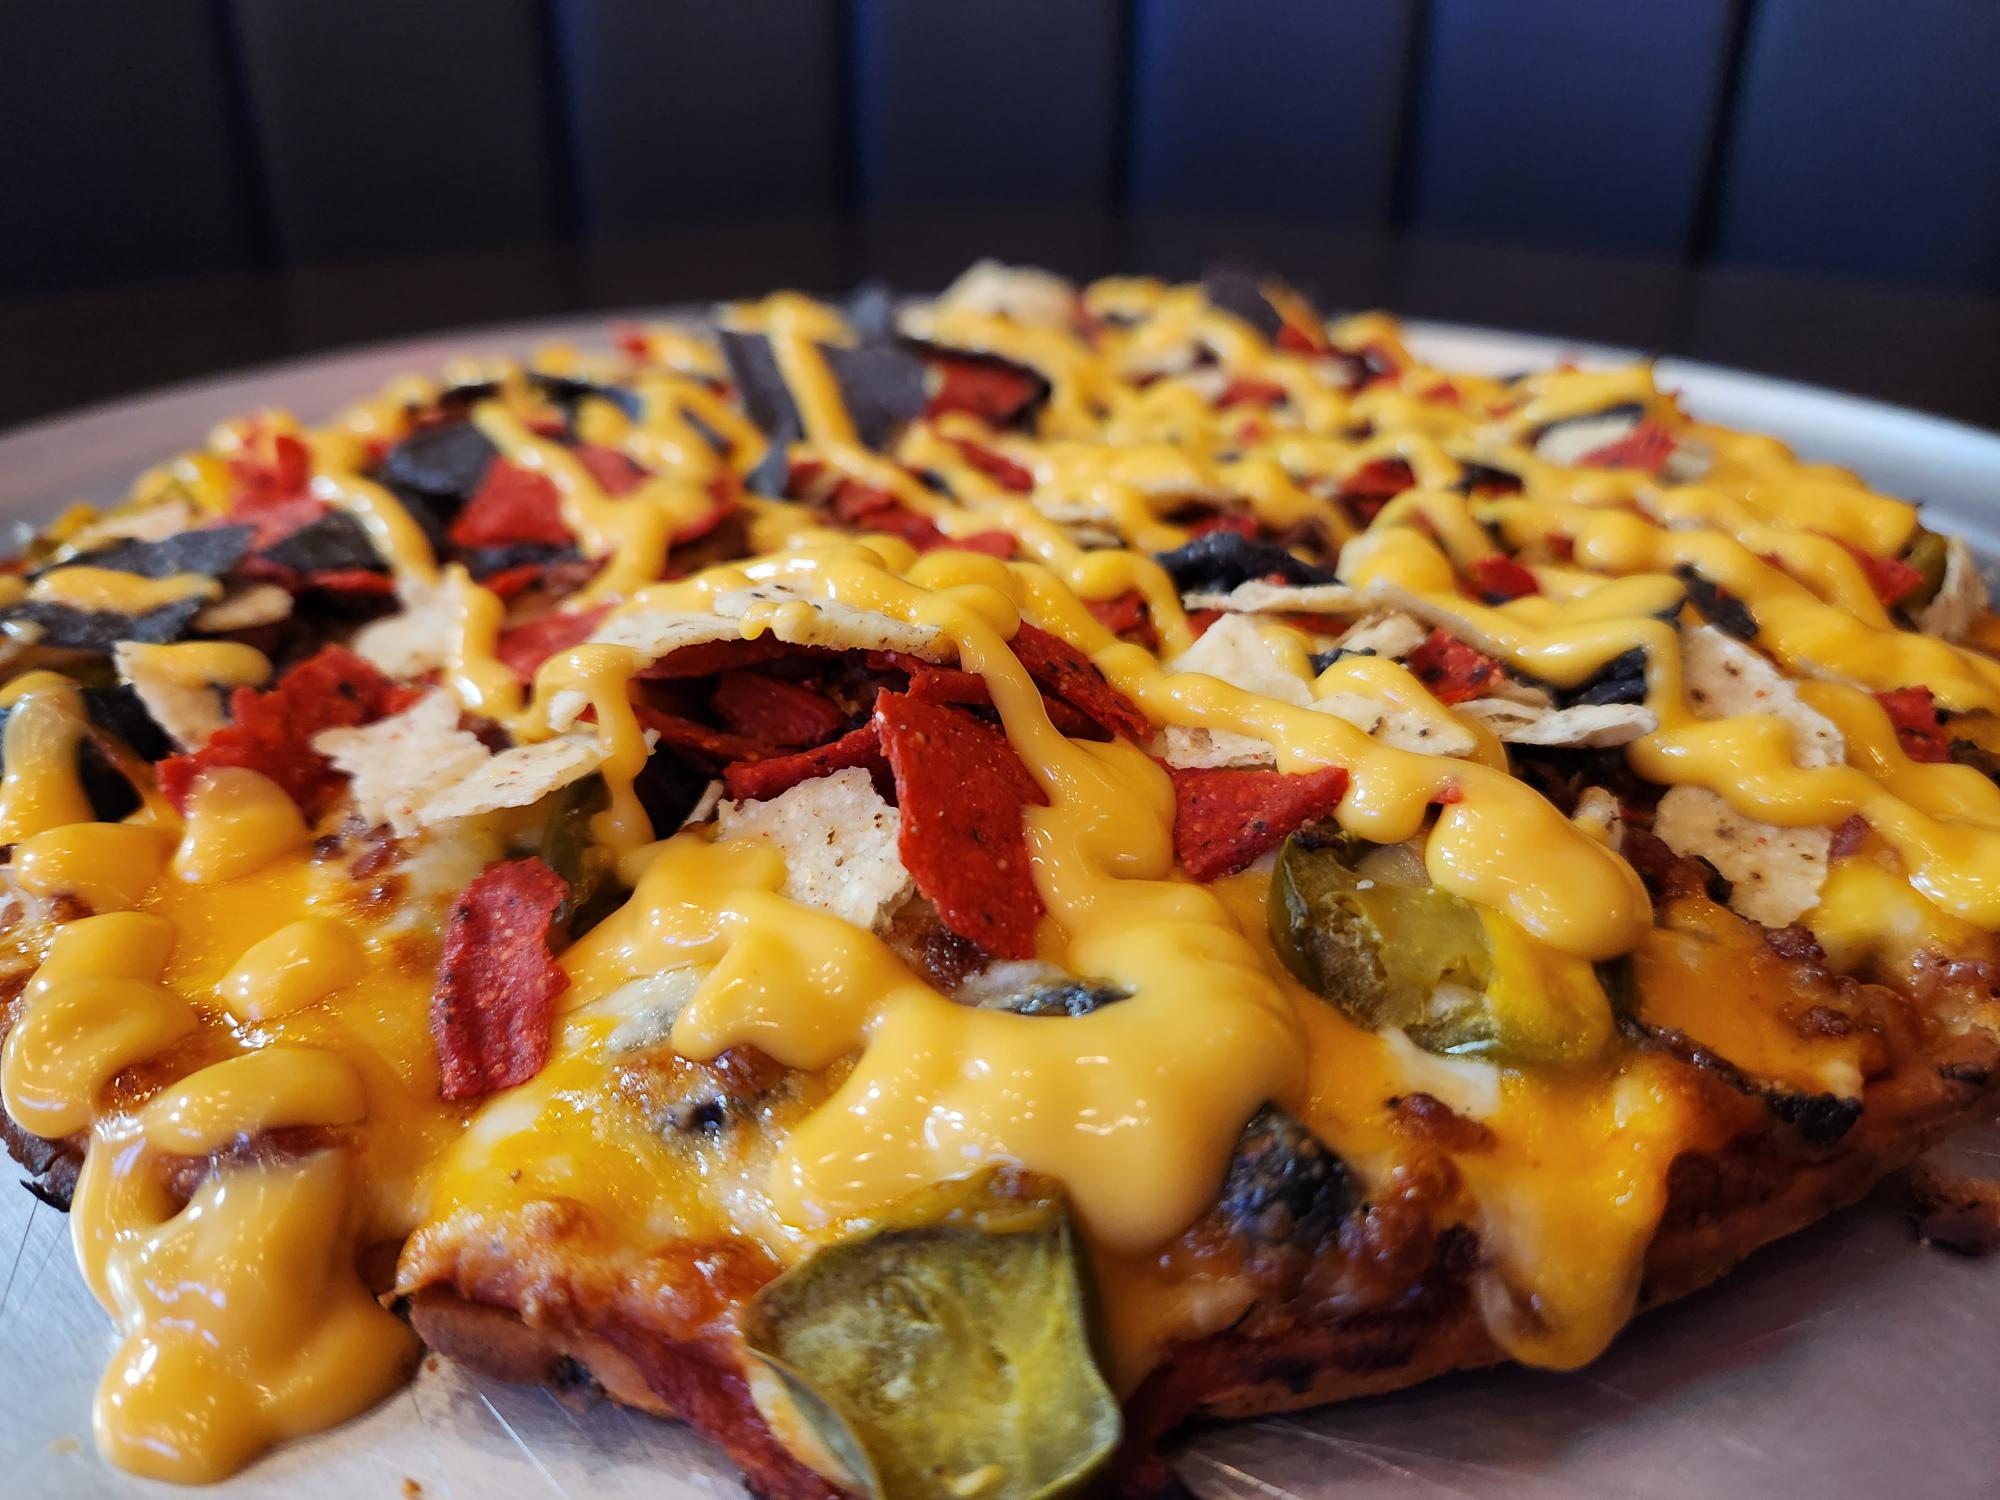 Nacho Libre pizza from Tossers Pizza & Beer